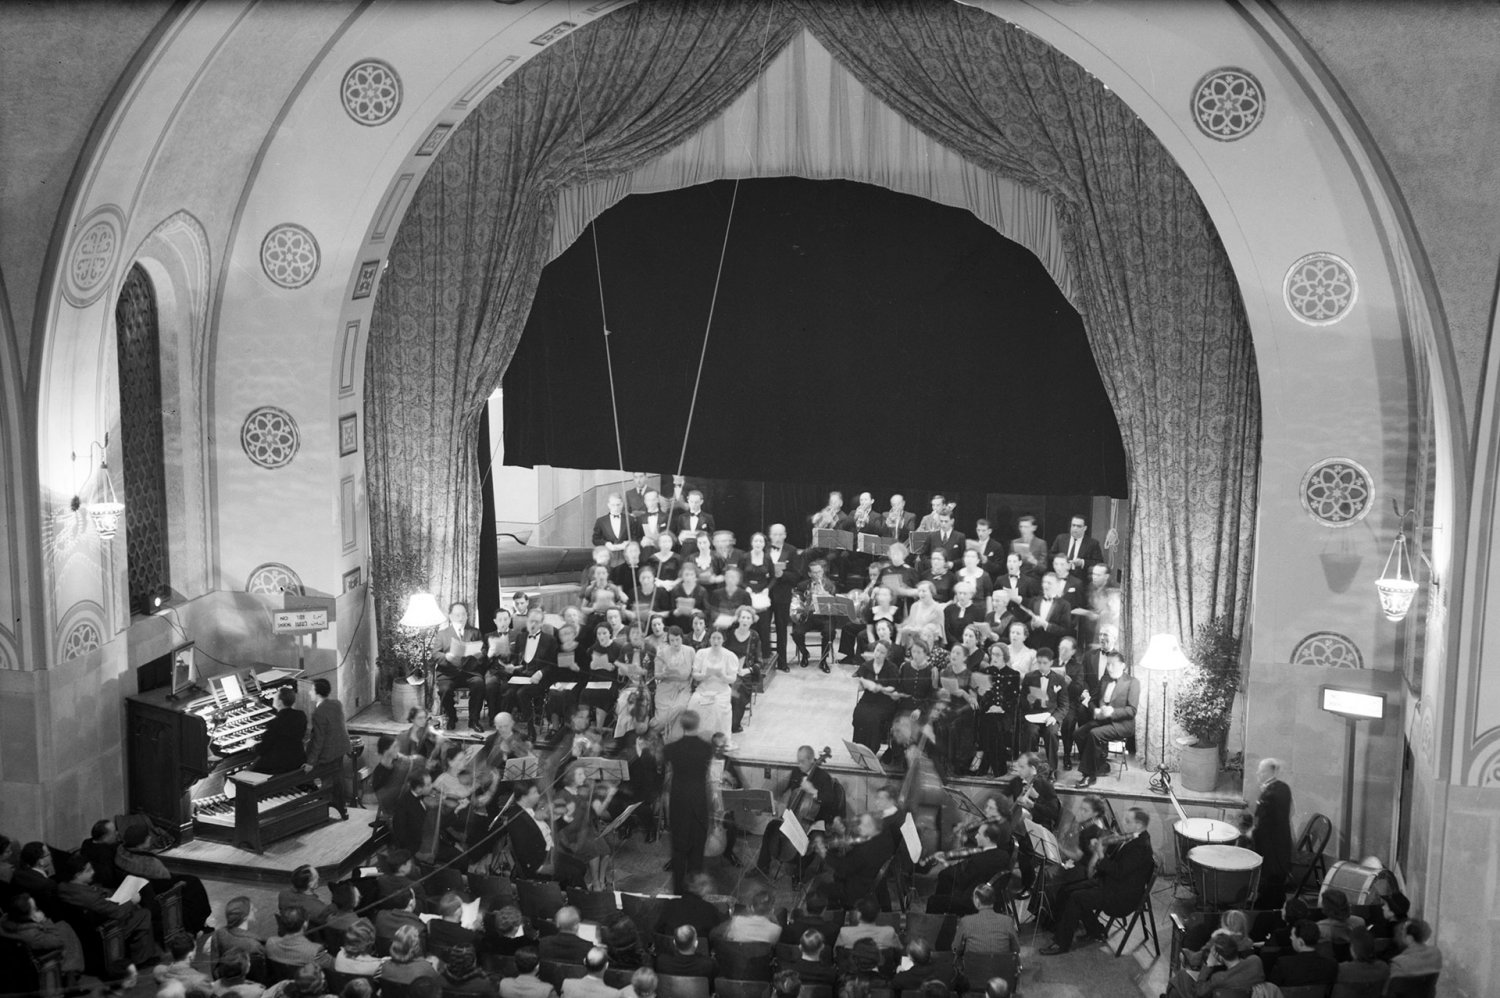 The inaugural concert of the Palestine Broadcasting Service (PBS) Choral Society at the Jerusalem YMCA, November 22, 1938